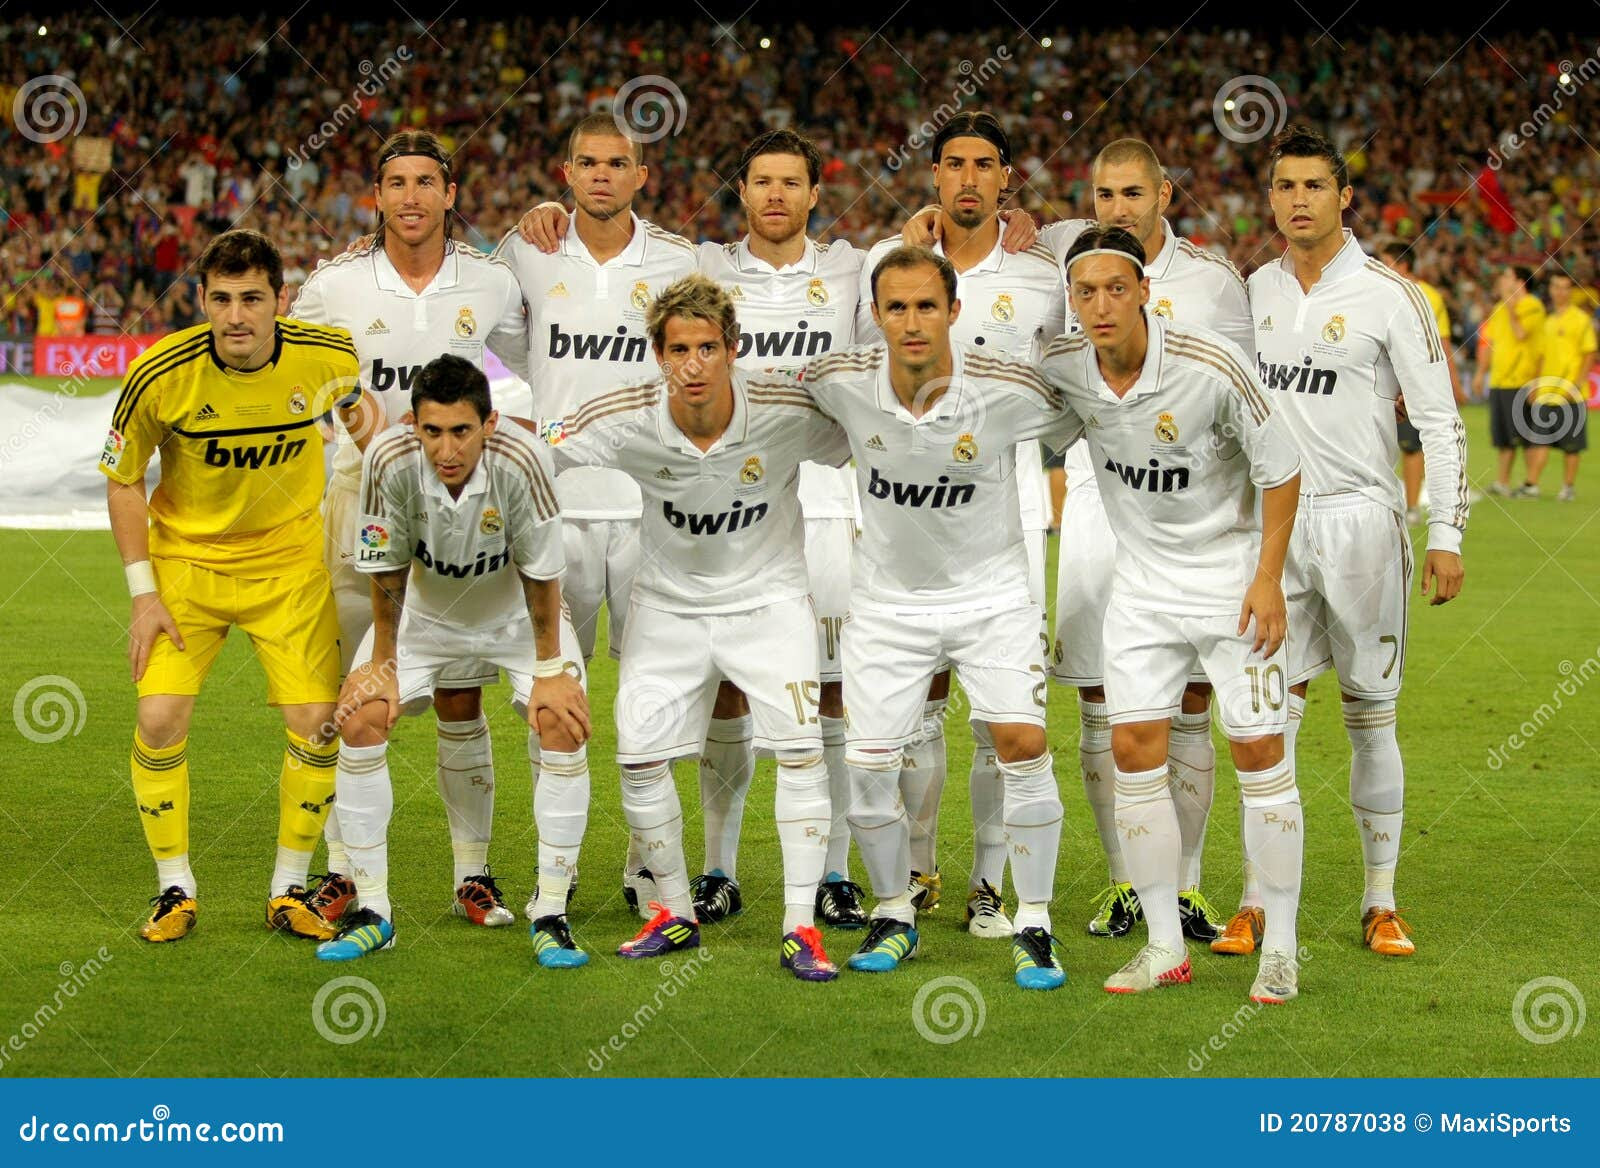 Download this Real Madrid Neuen Lager Stadion Barcelona August picture